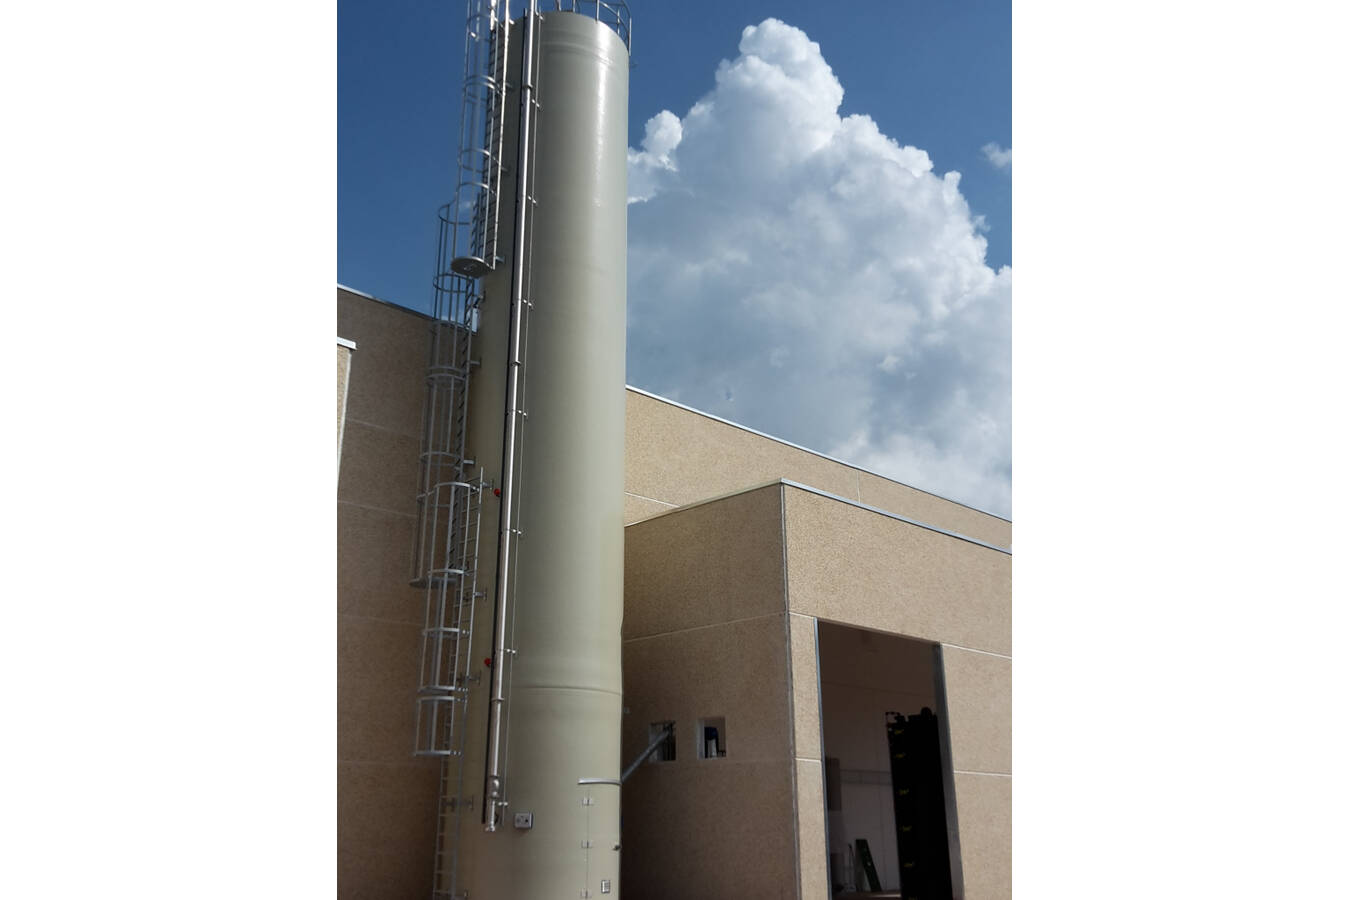 Composite silos for starch: trouble-free for years Several years after installation, Polem’s starch silos were trouble-free and rated as one of the cleanest starch silos ever inspected.